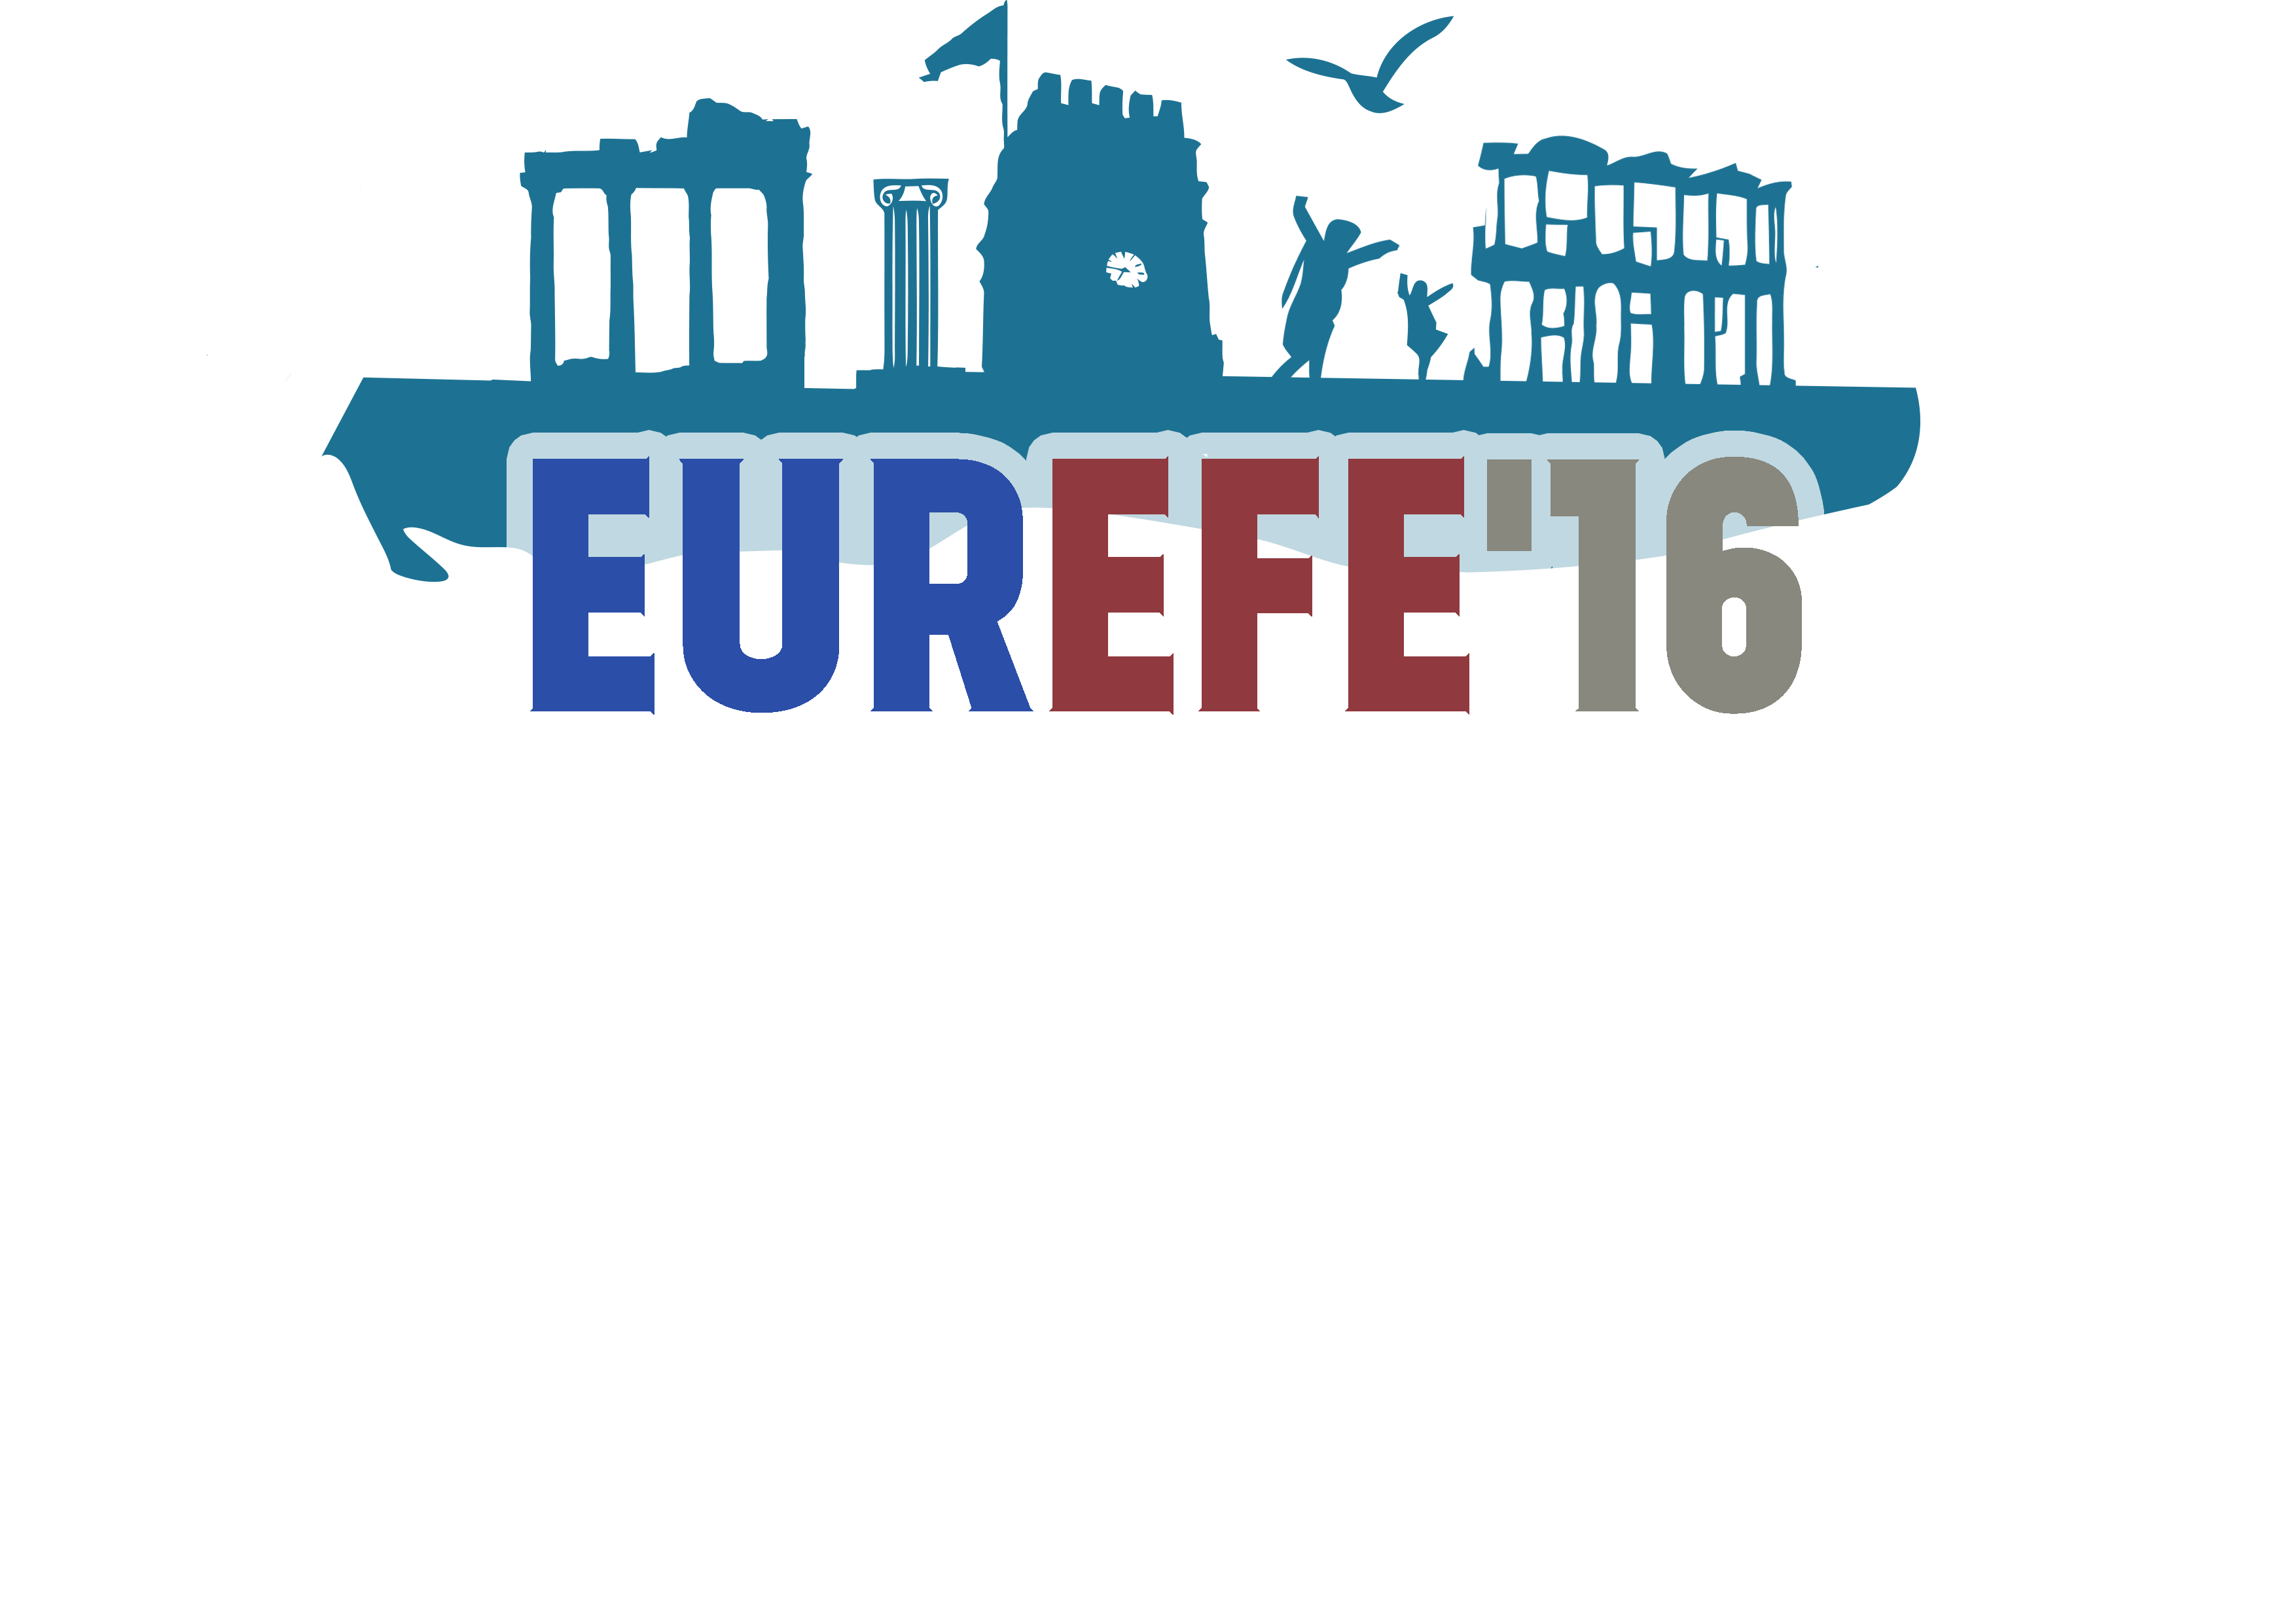 EUREFE'16 (European Union Relationships, Economics, Finance and Econometrics) Conference will be held in 14-16 July 2016 at Adnan Menderes University, Aydın Faculty of Economics in Aydın/Turkey. 2016 topic of EUREFE Conference Series is: �'The Unemployment Problem in European Union Countries and Turkey: Impacts and Policy Recommendations''